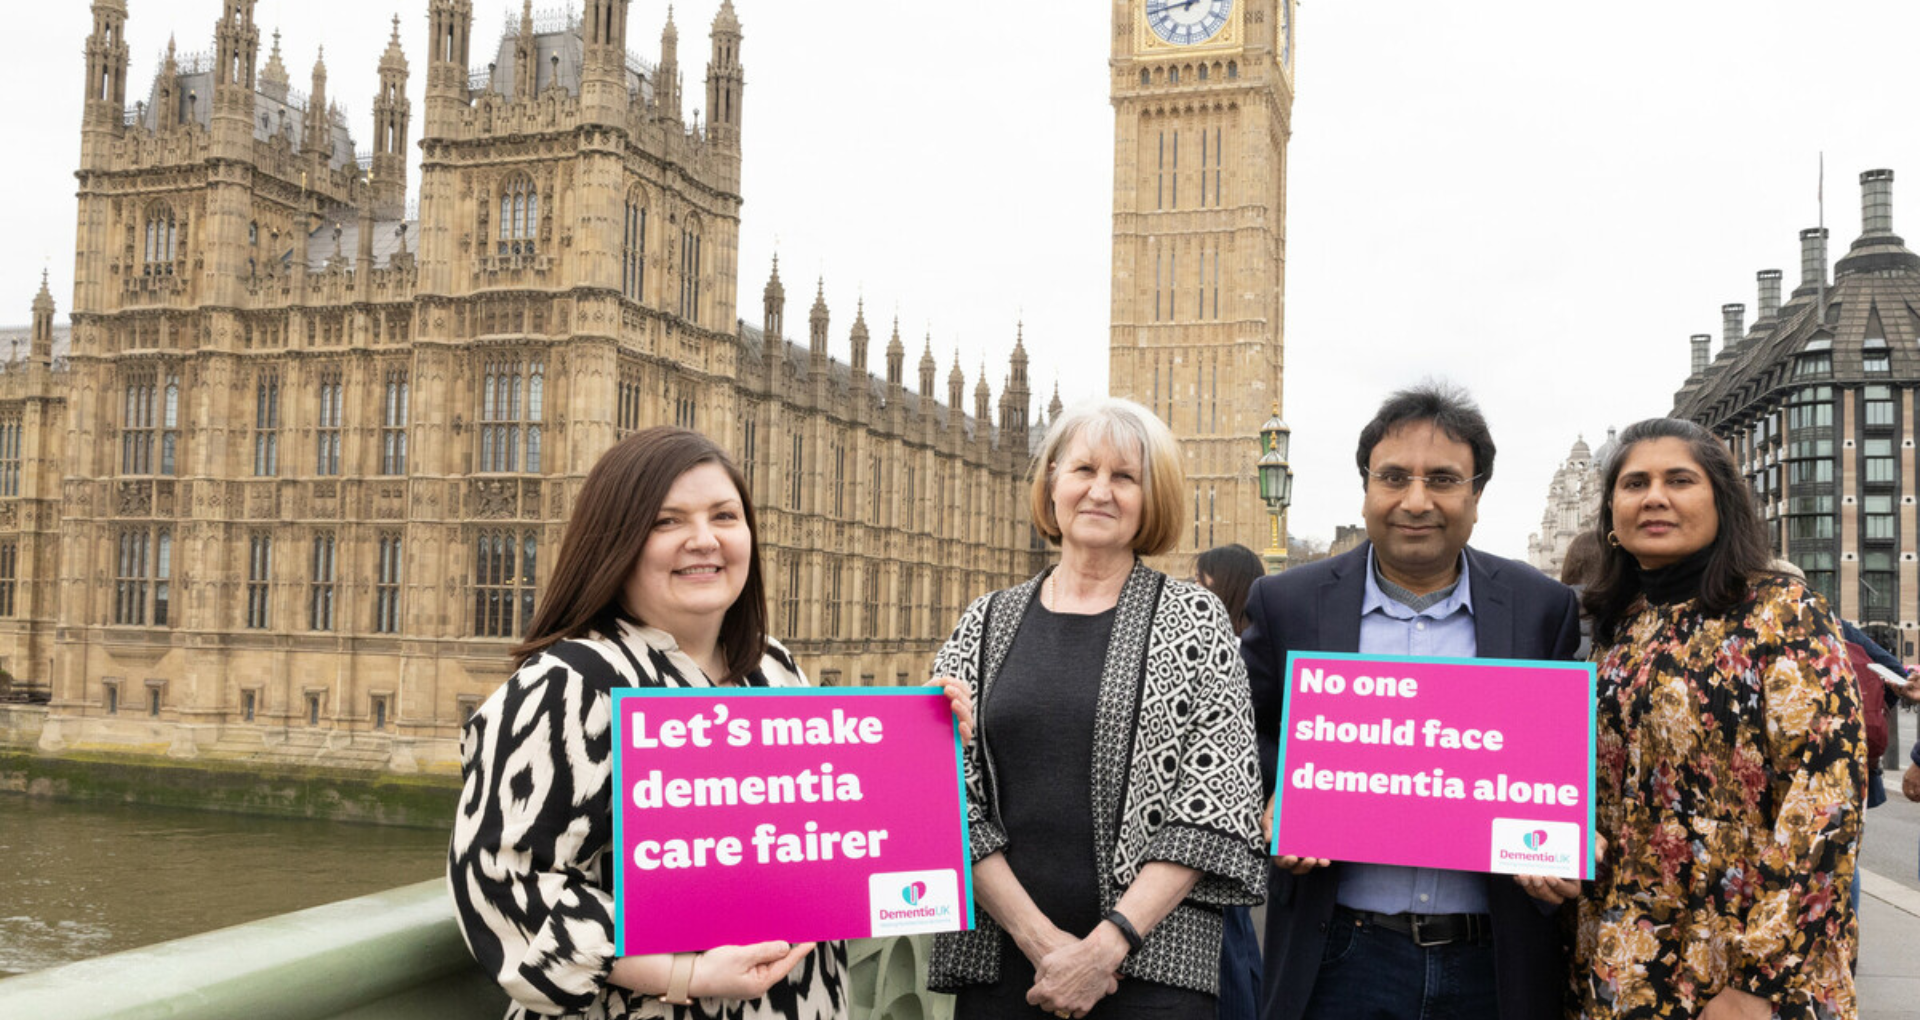 dementia uk supporters at fix the funding event in parliament